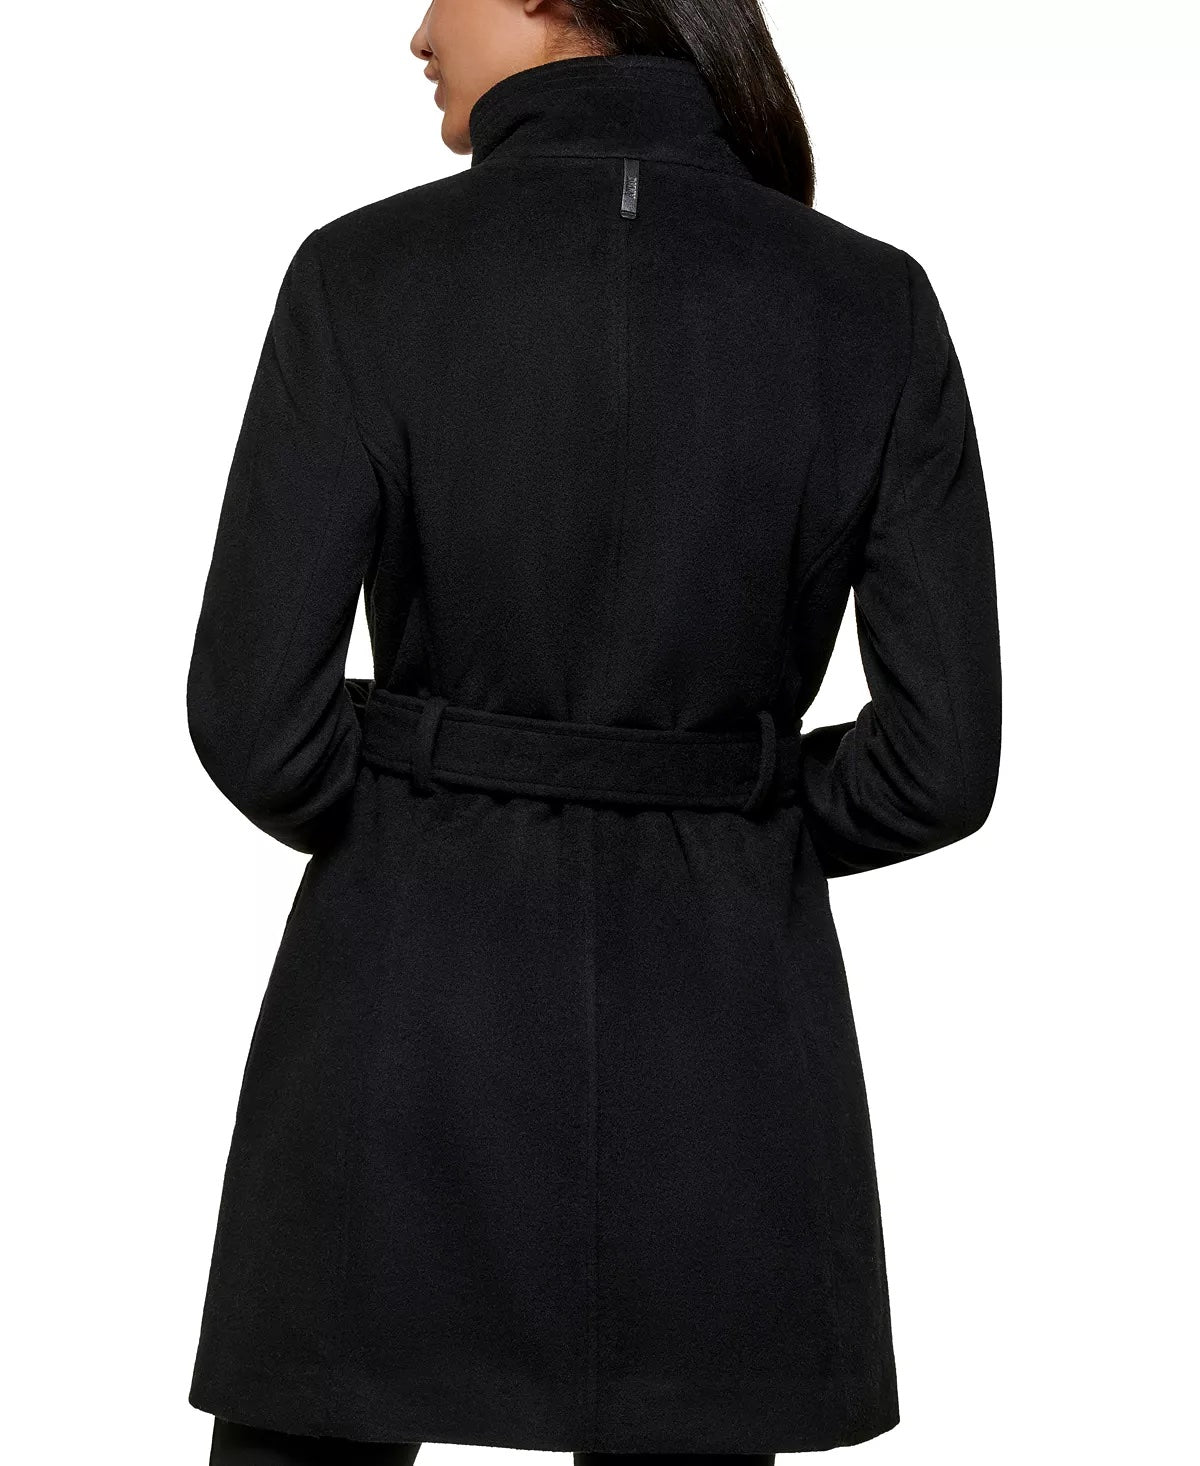 DKNY Women's Stand-Collar Button-Front Belted Coat Black XL